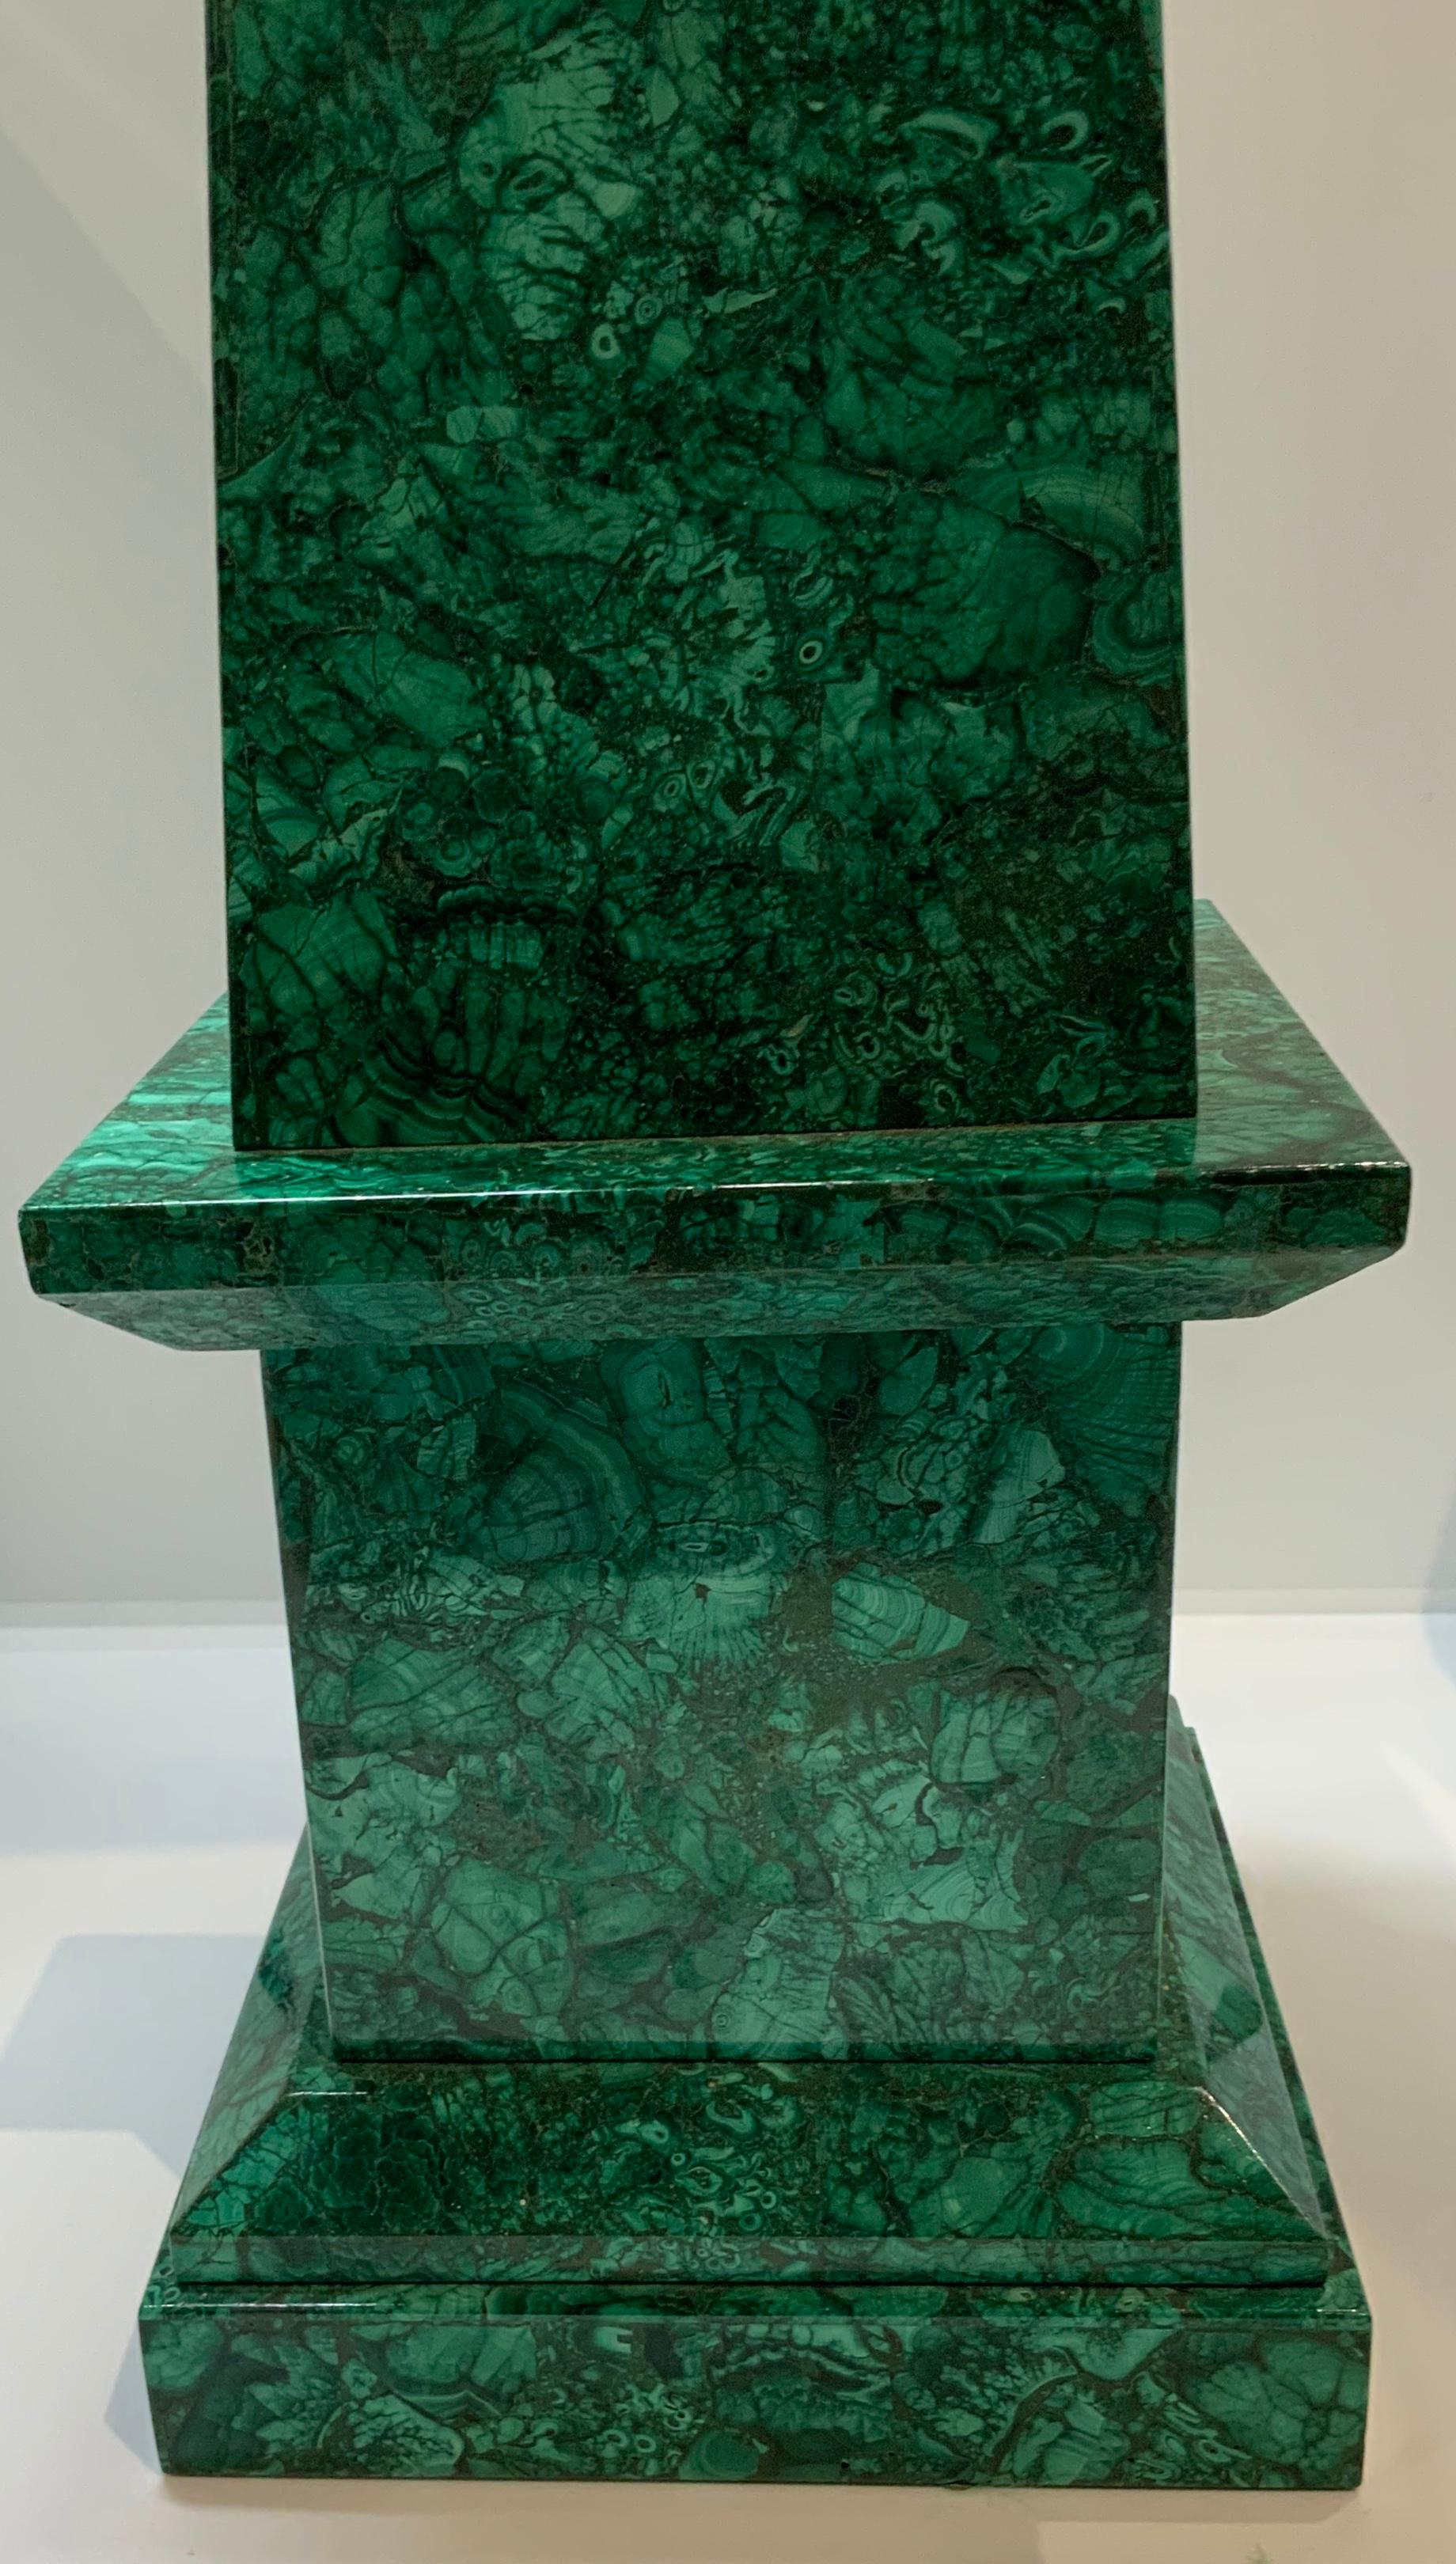 Imposing and solid malachite stone tower shaped as a square base with a long tapered rectangular body and ending with a pyramidal too.